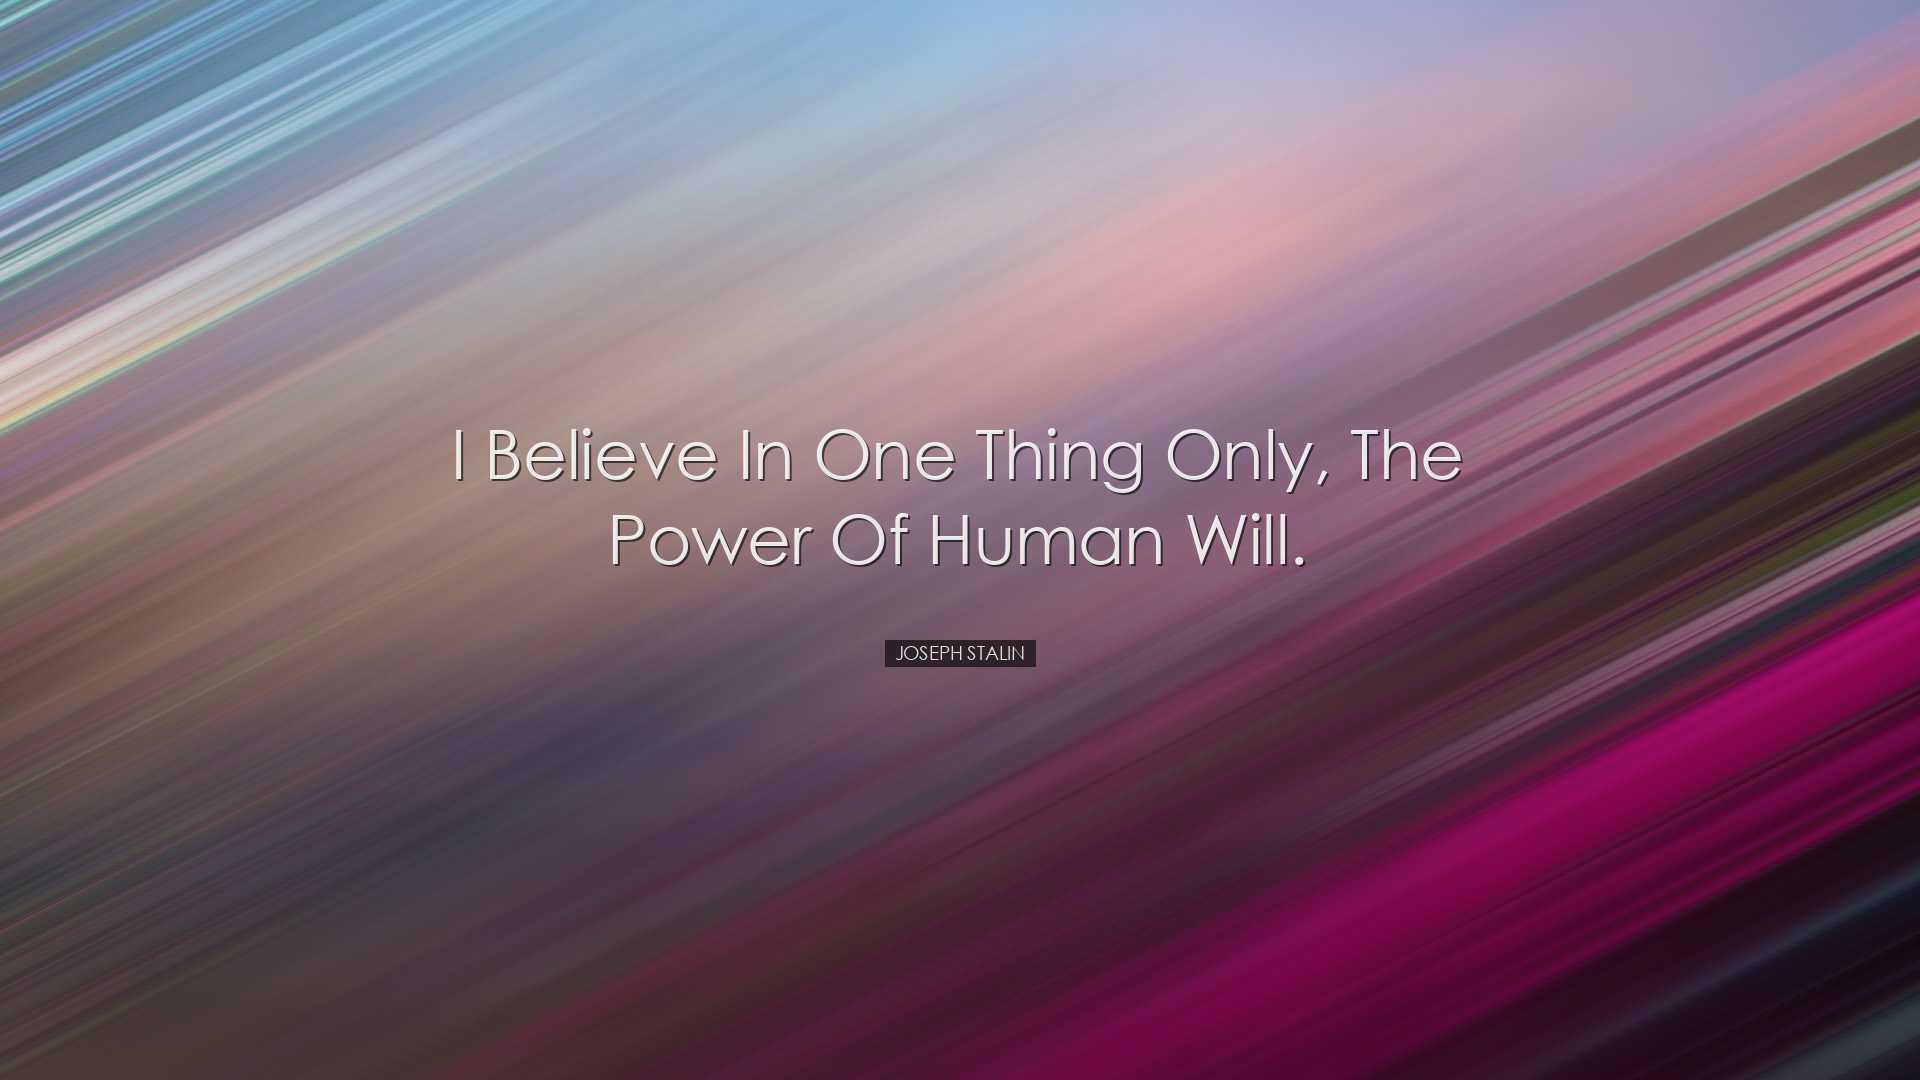 I believe in one thing only, the power of human will. - Joseph Sta